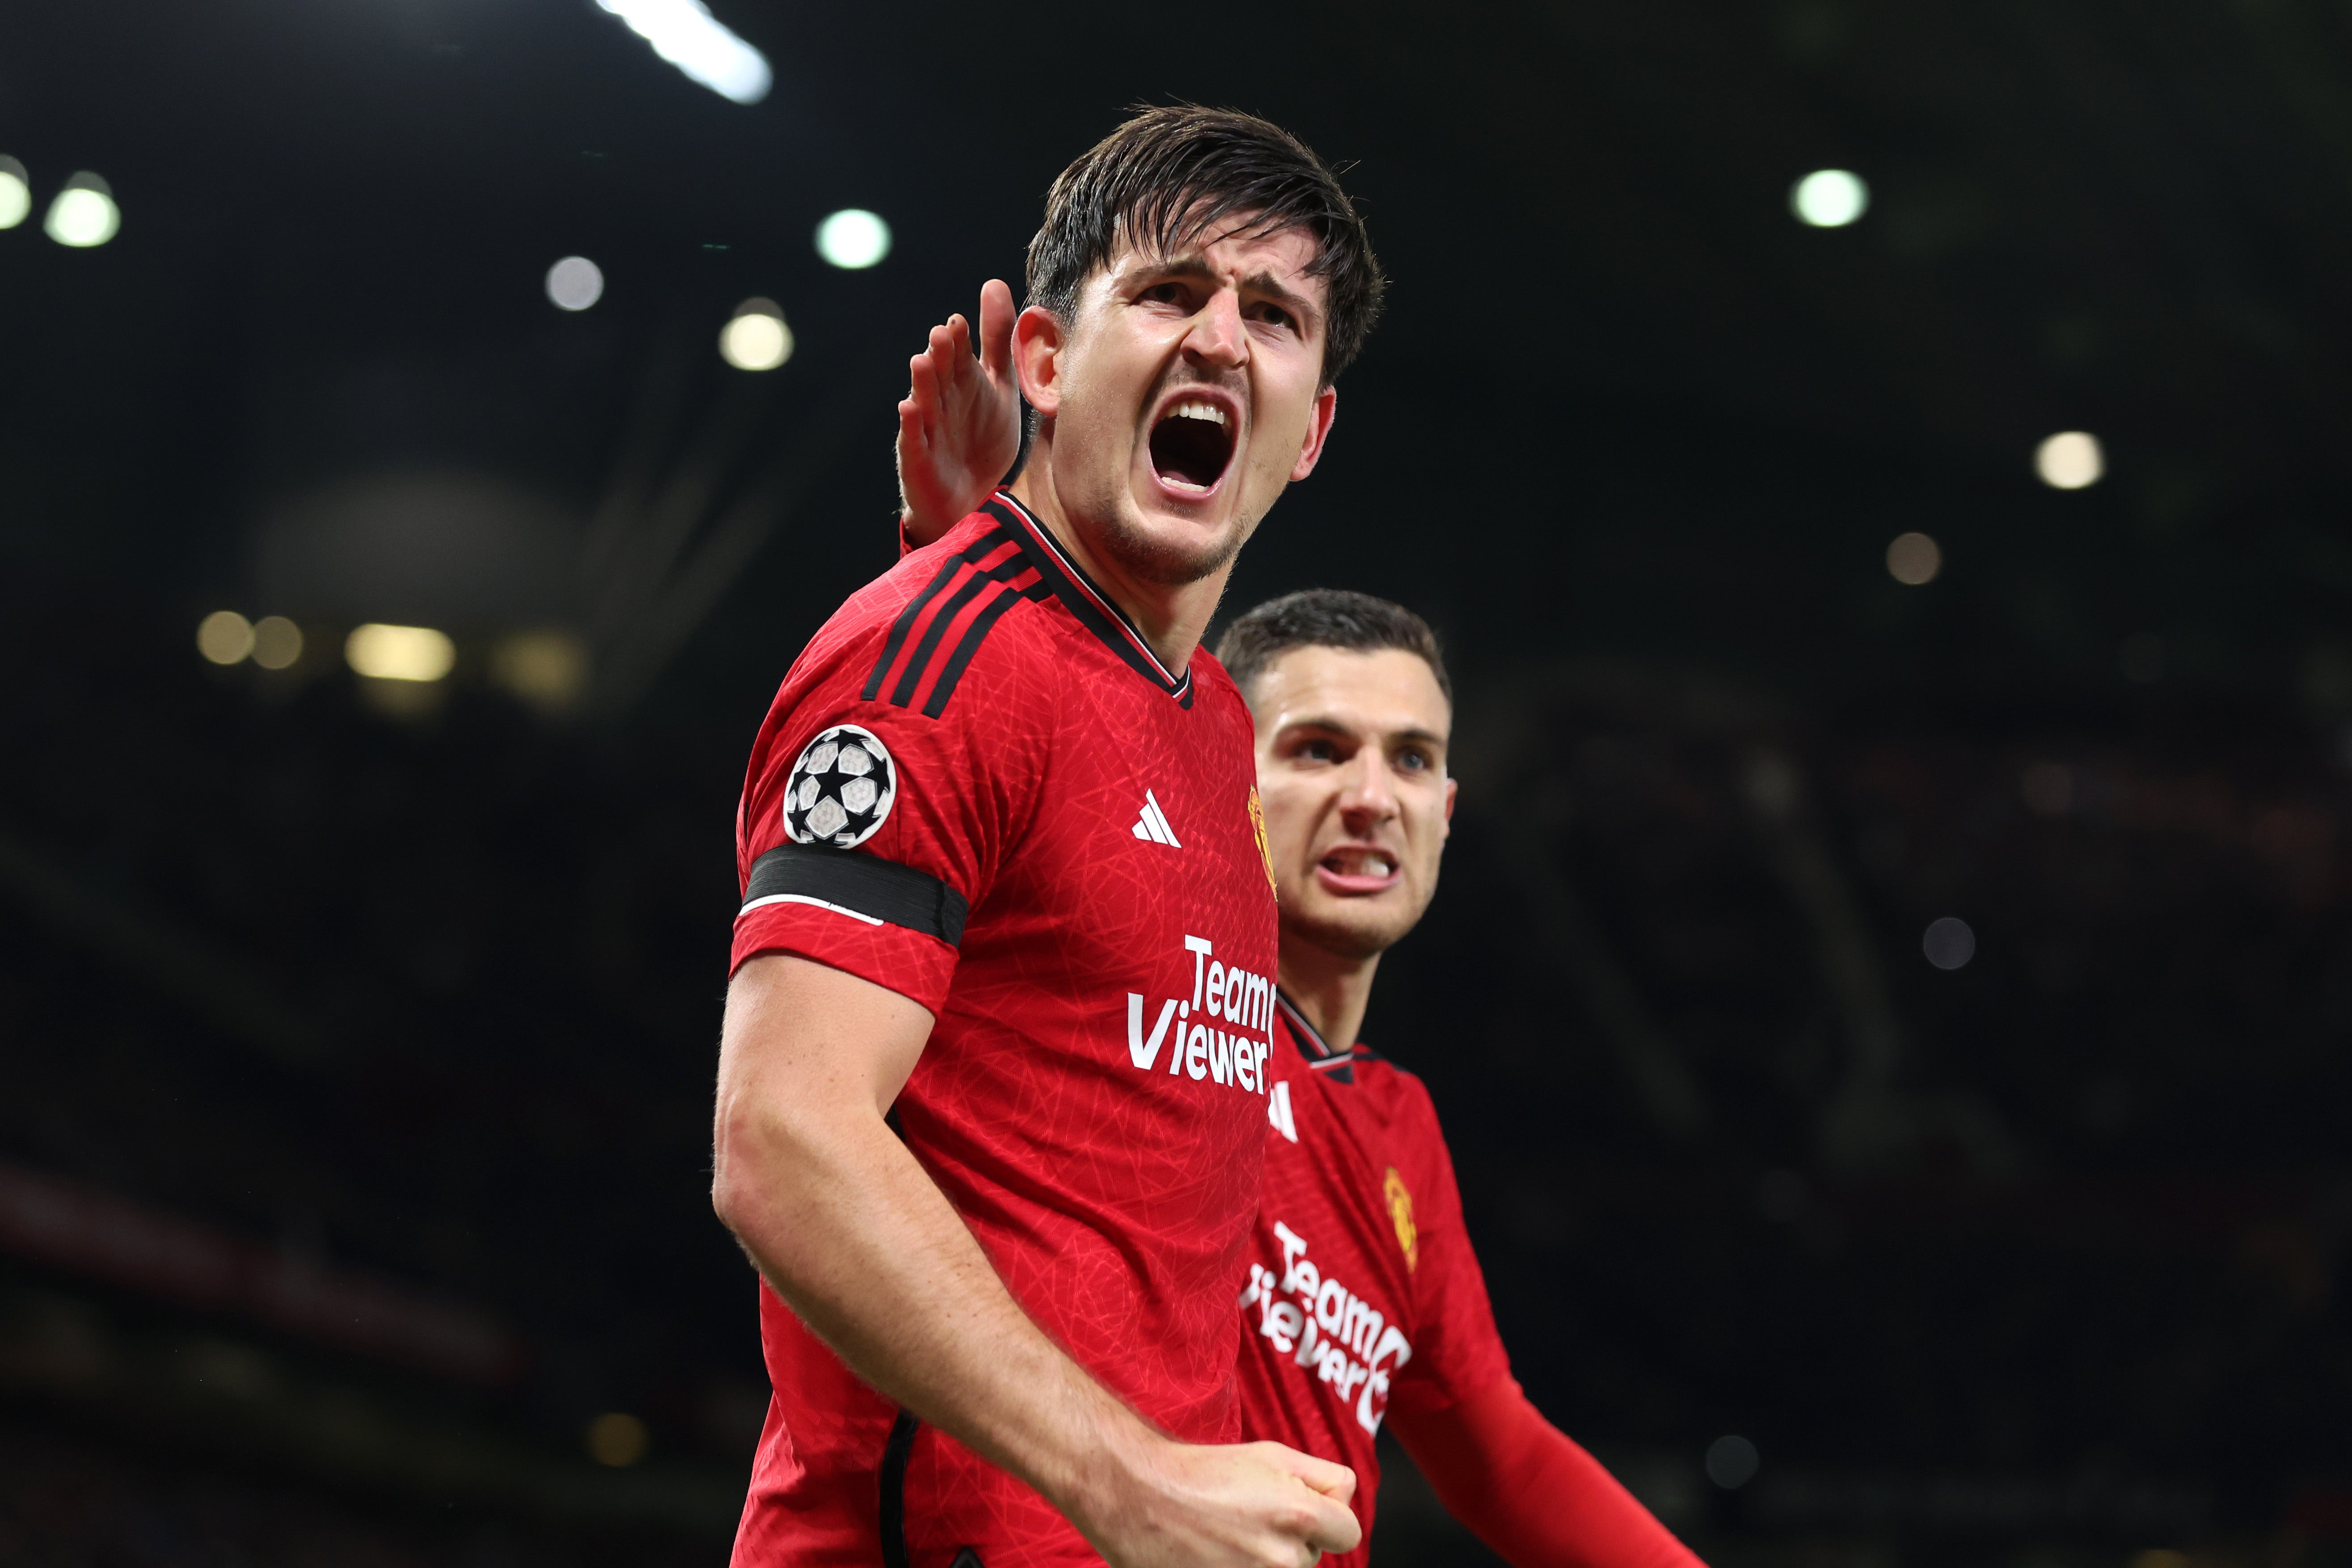 Maguire went from zero to hero with a crucial goal for United